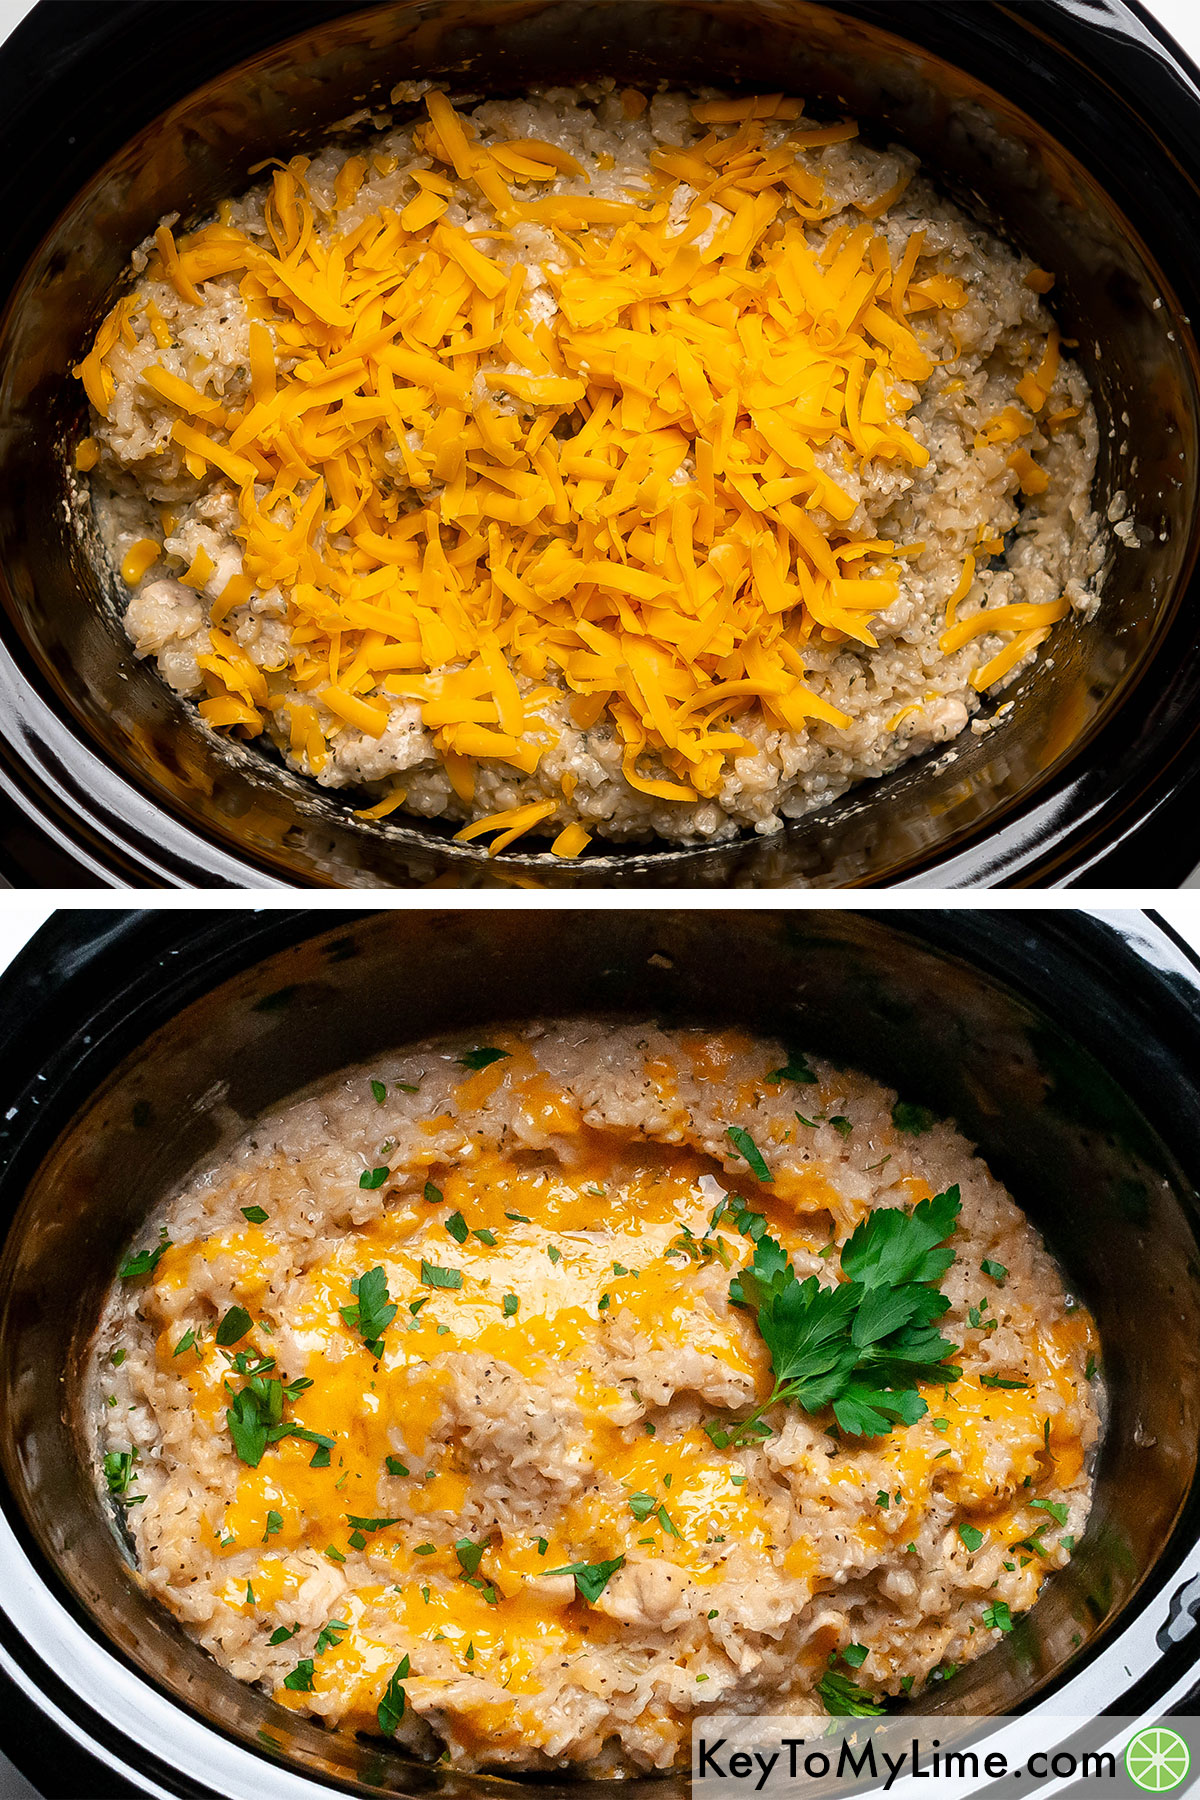 Sprinkling shredded cheese over top of the cooked chicken and rice dish and garnishing with parsley once melted.